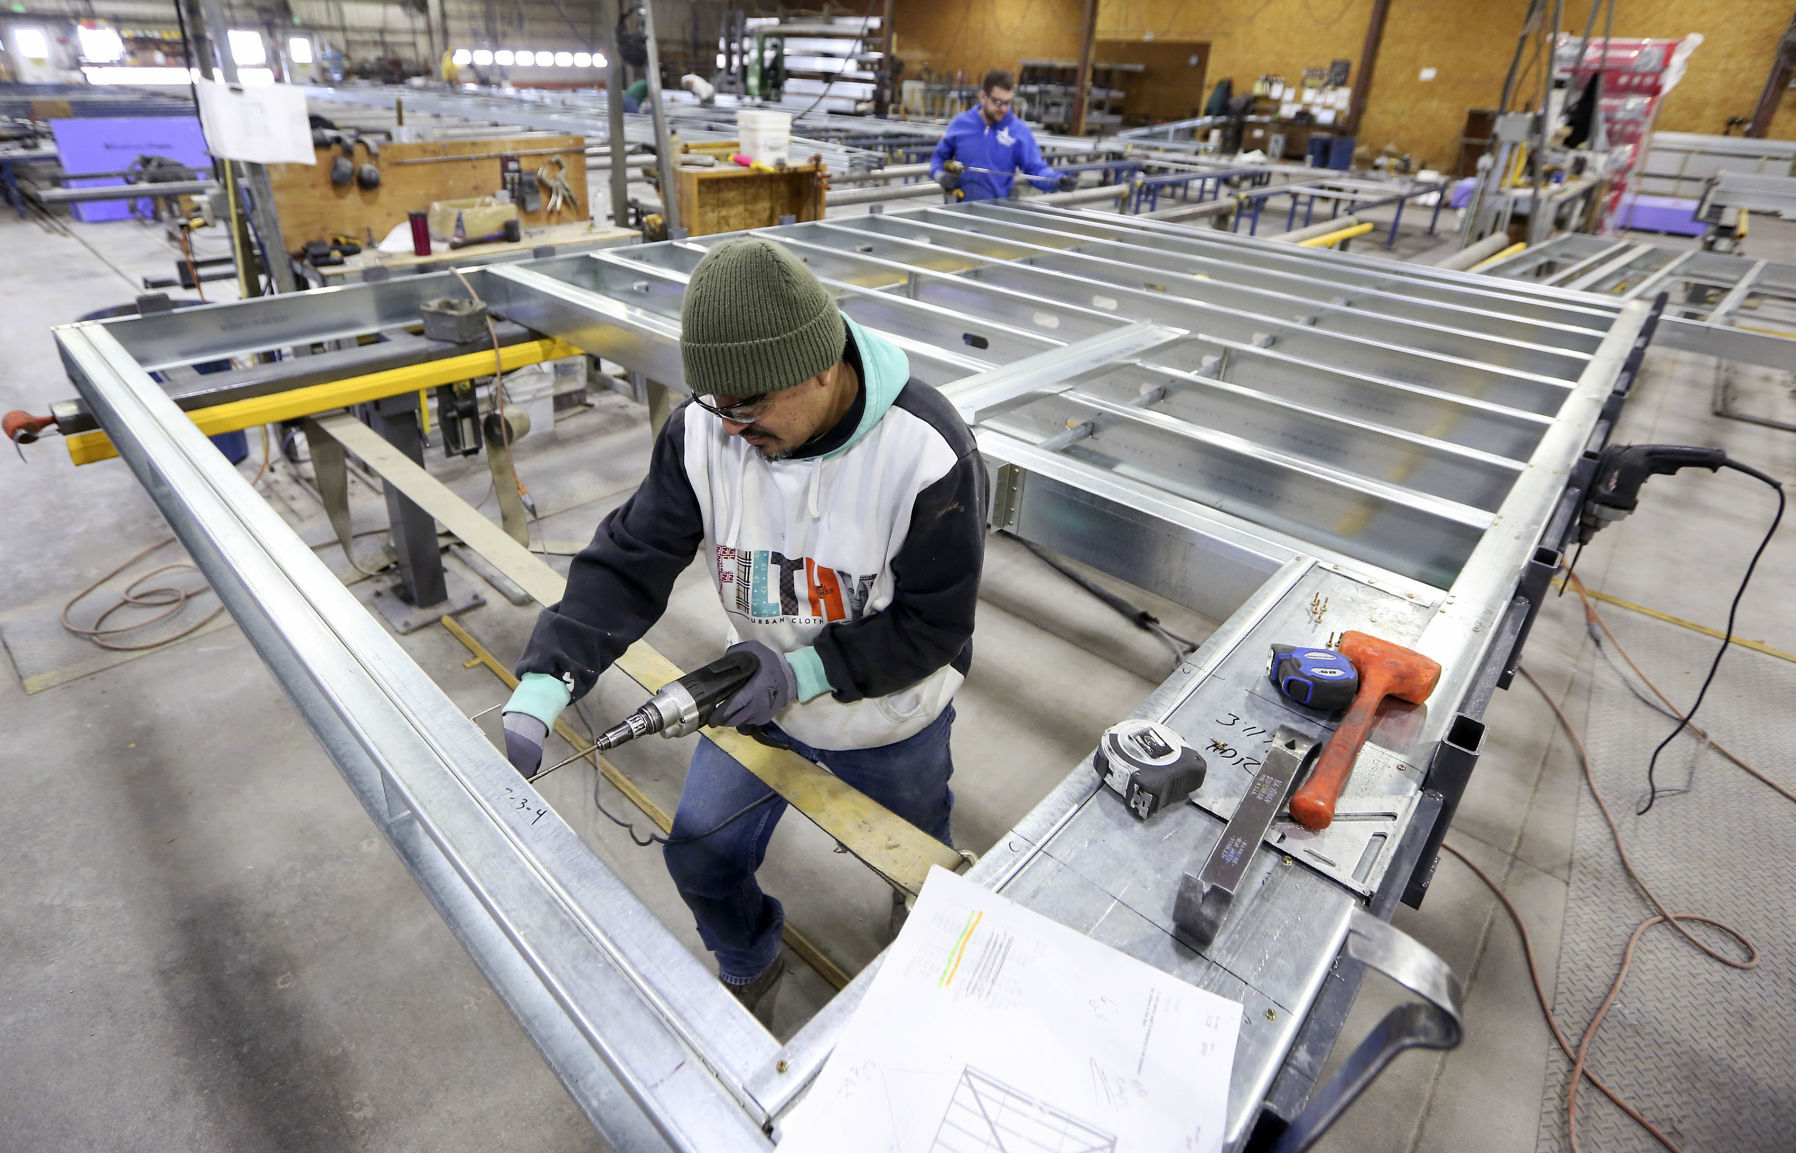 Javier Montoya assembles steel wall panels at Cascade Manufacturing Co. The Iowa company’s specialty is trusses for a building’s roof or flooring. It sends its products throughout the United States. The family-owned company began in 1953, and today has 250 employees across all its sites.    PHOTO CREDIT: NICKI KOHL